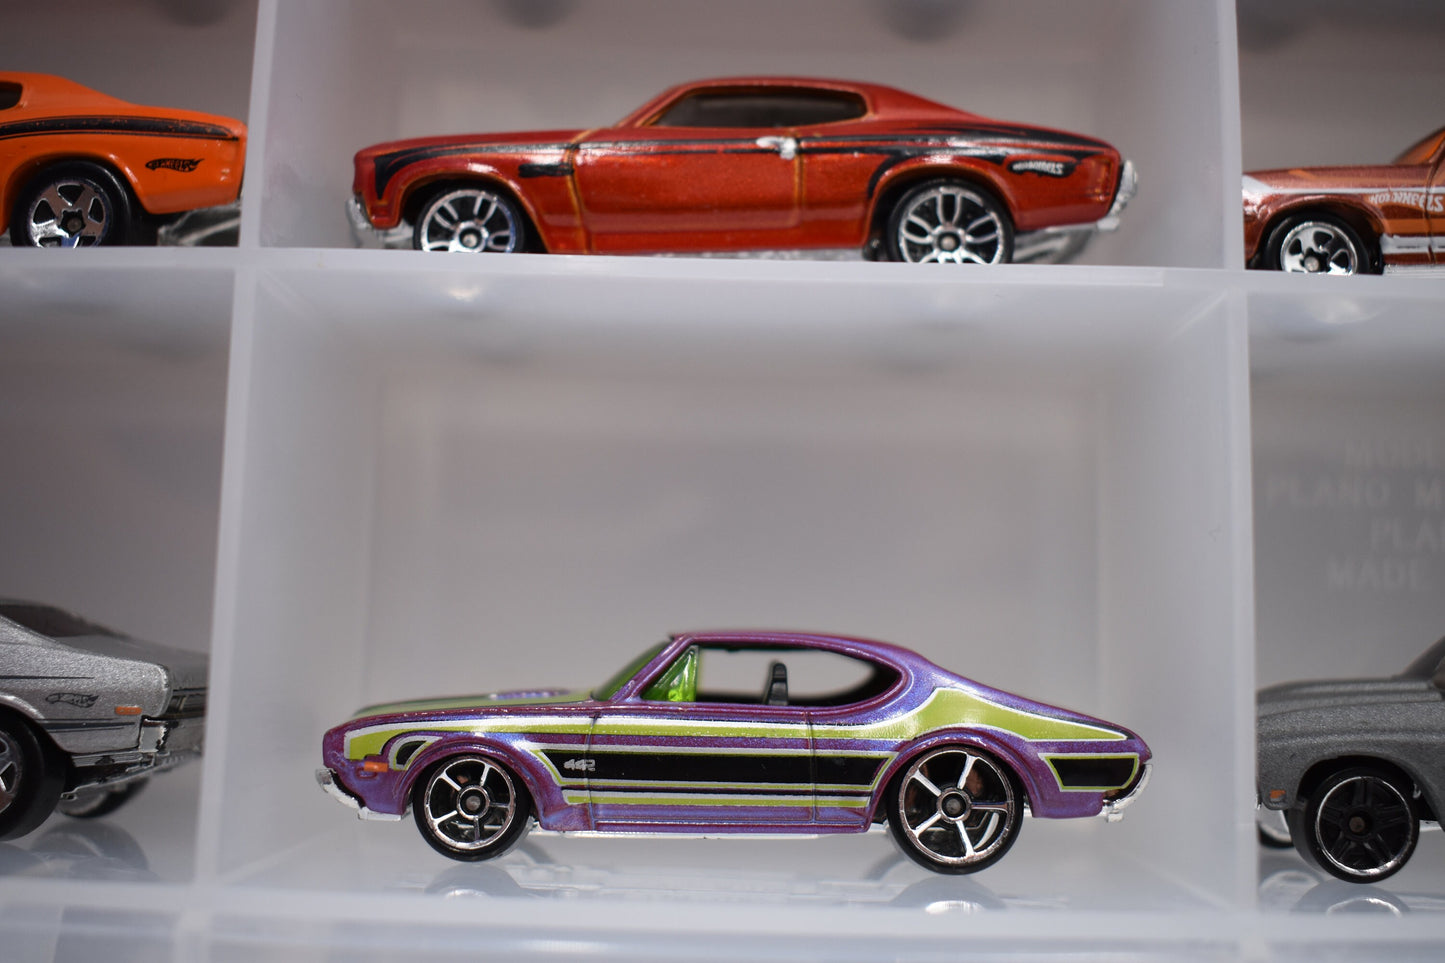 Hot Wheels Muscle Cars Collection Perfect Birthday Gift Miniature Collectible Scale Model Toy Car Lot Die Cast Display Storage Case